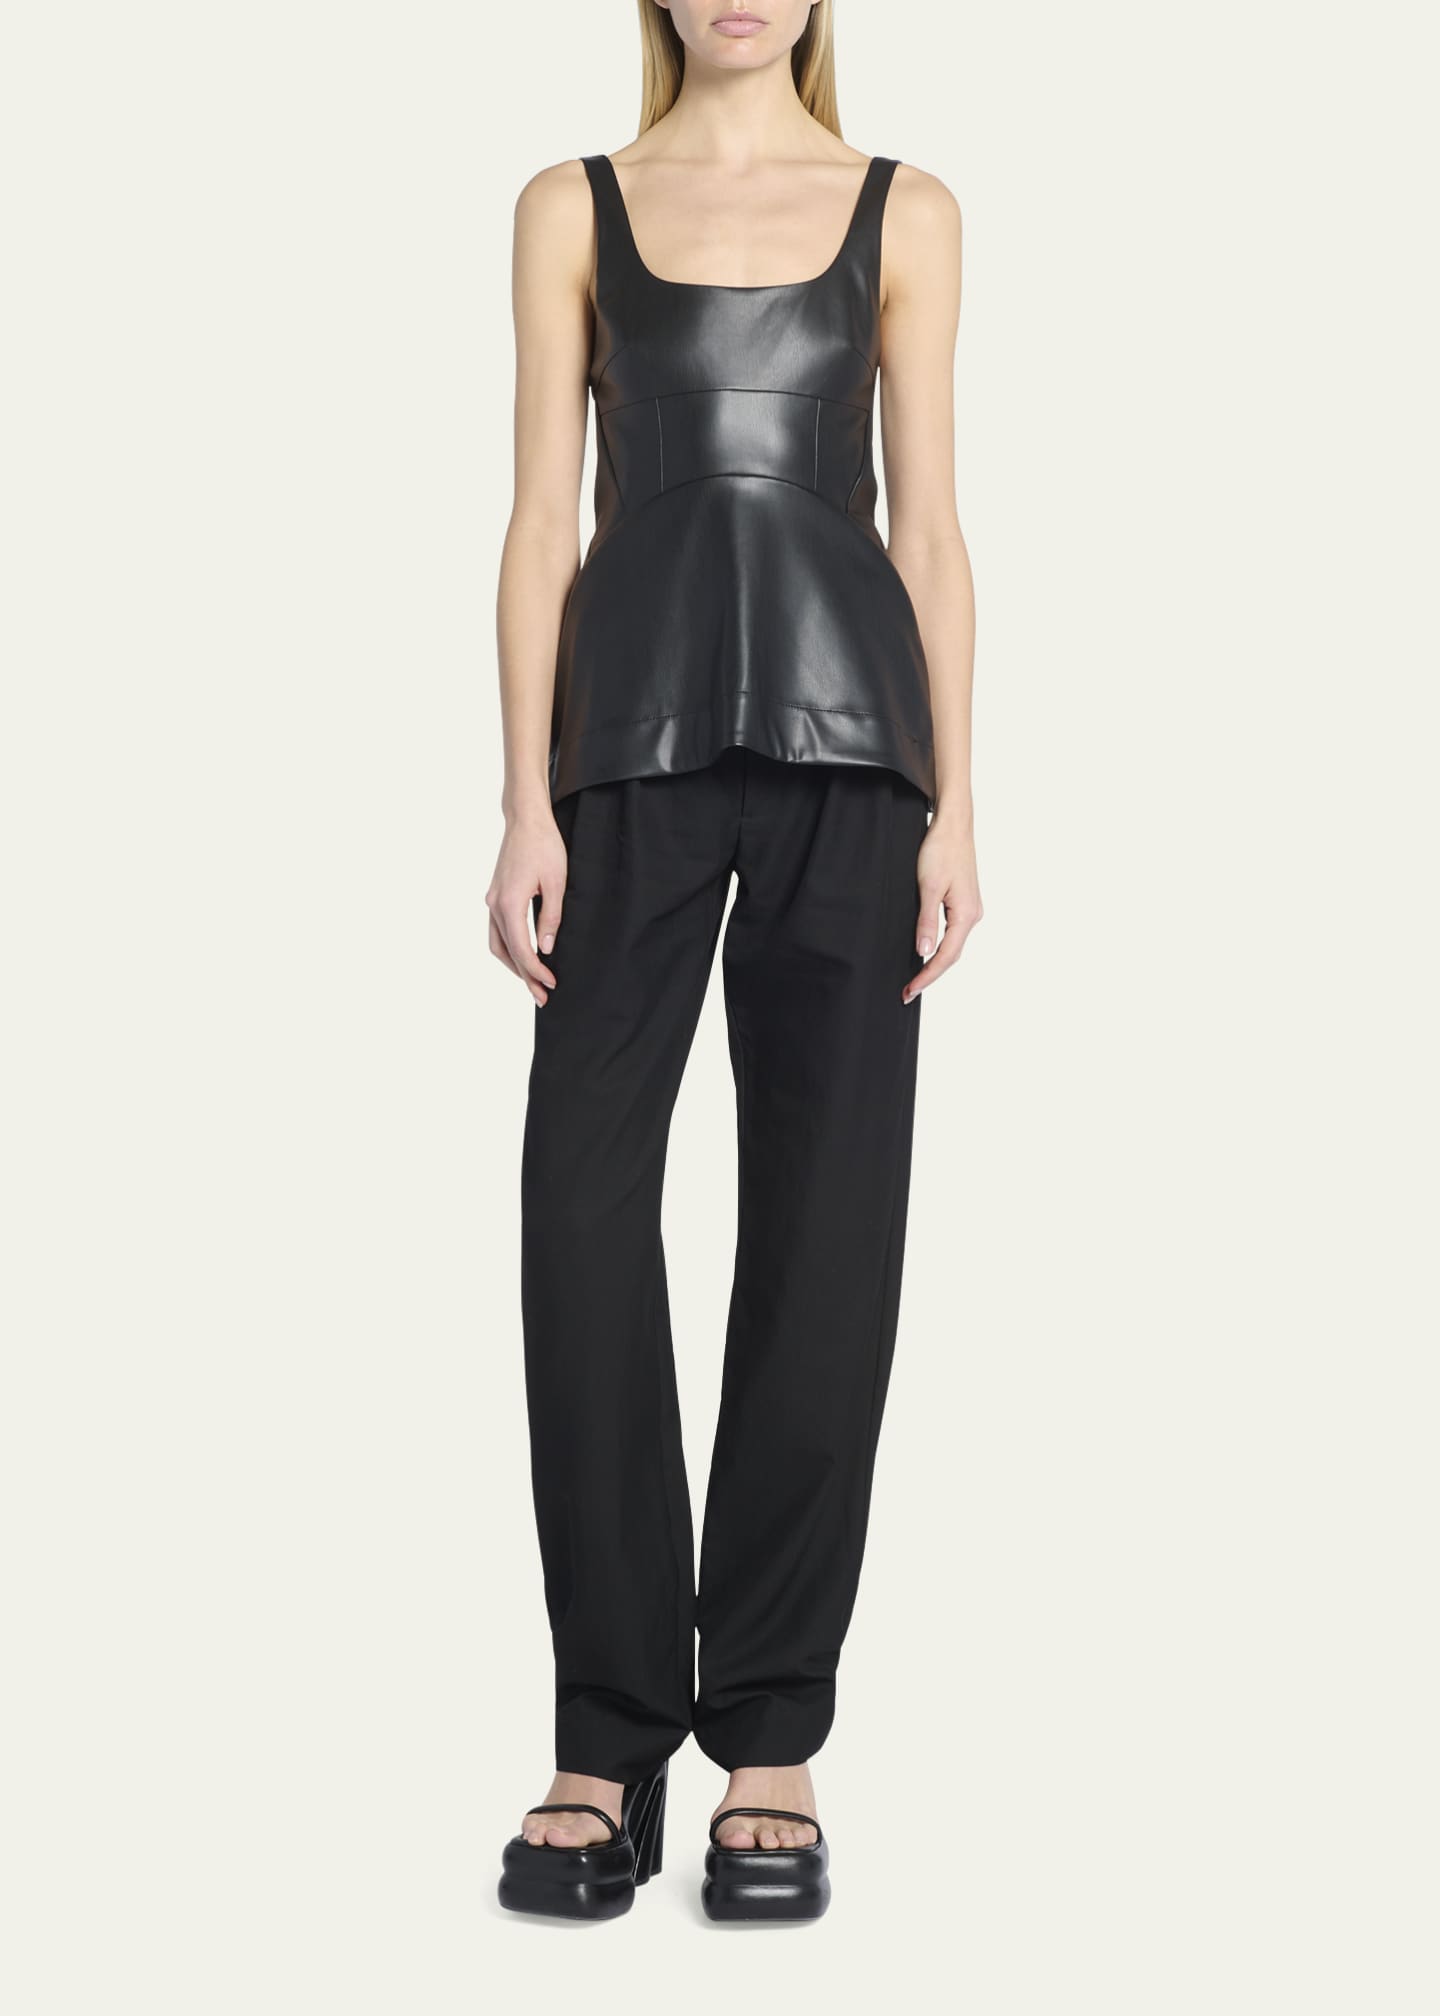 Proenza Schouler White Label Faux-Leather Fitted Peplum Top - Bergdorf ...